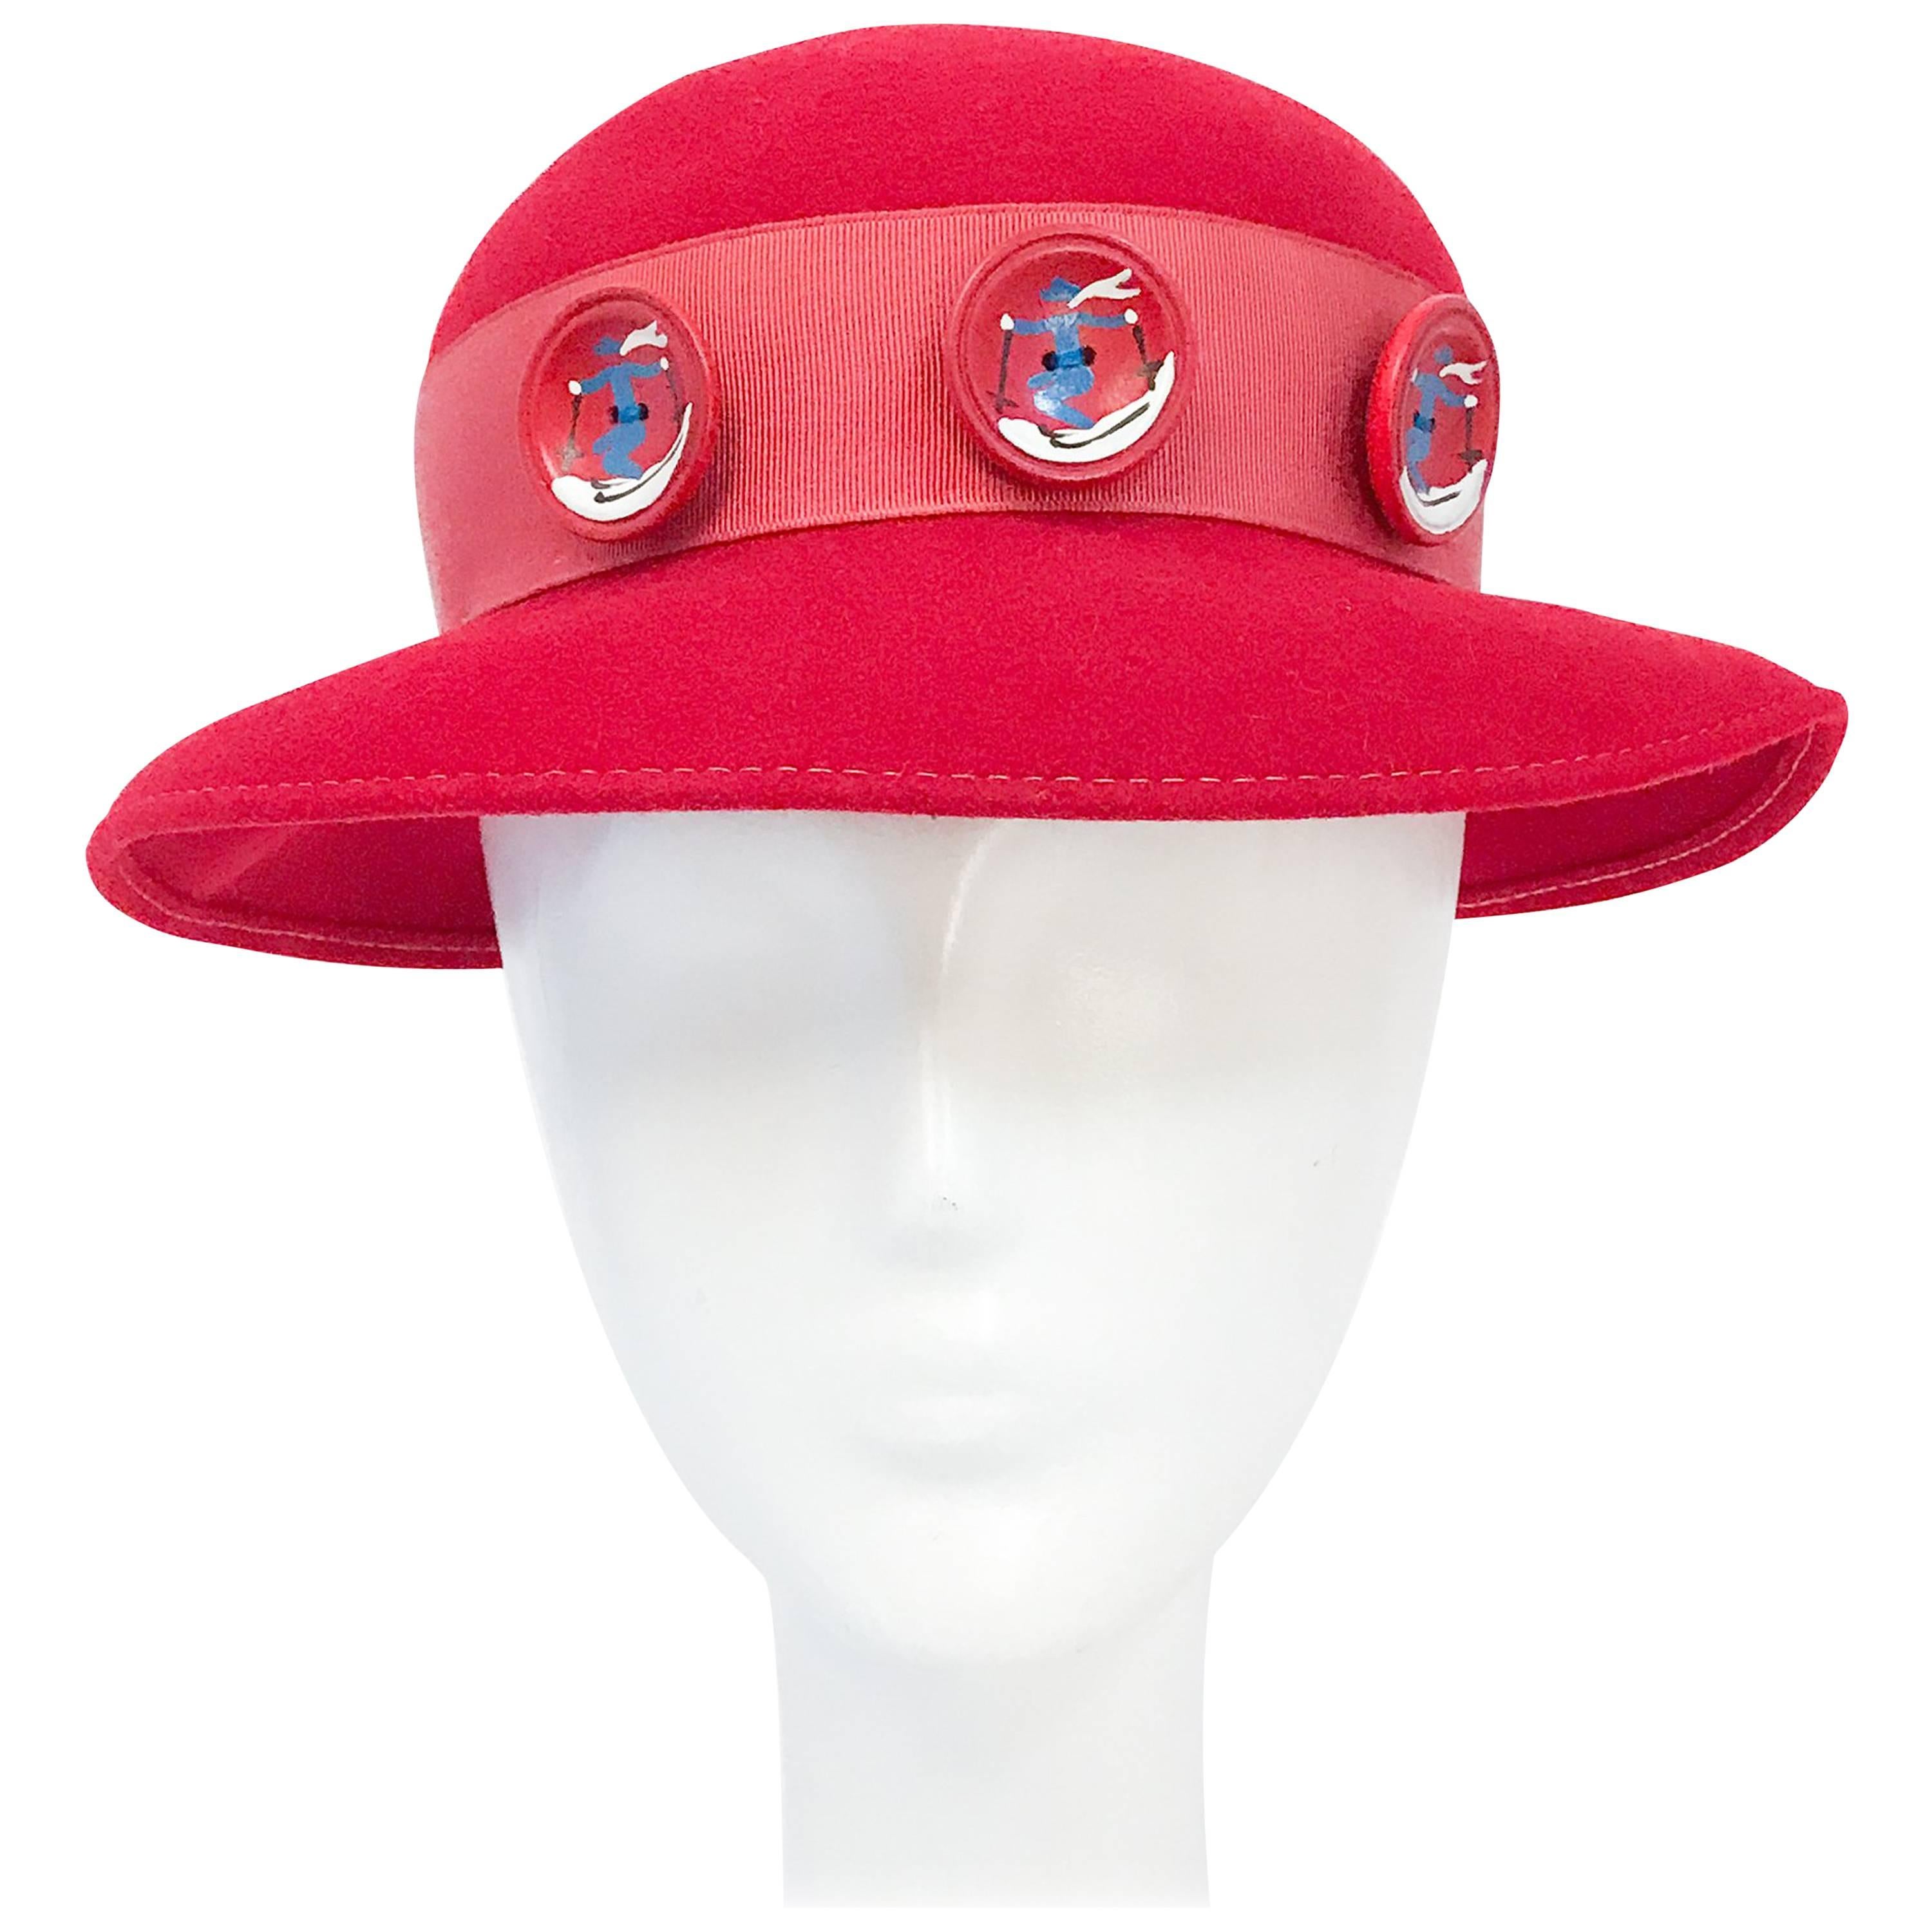 1930s Red Felt hat with Hand Painted Ski Buttons